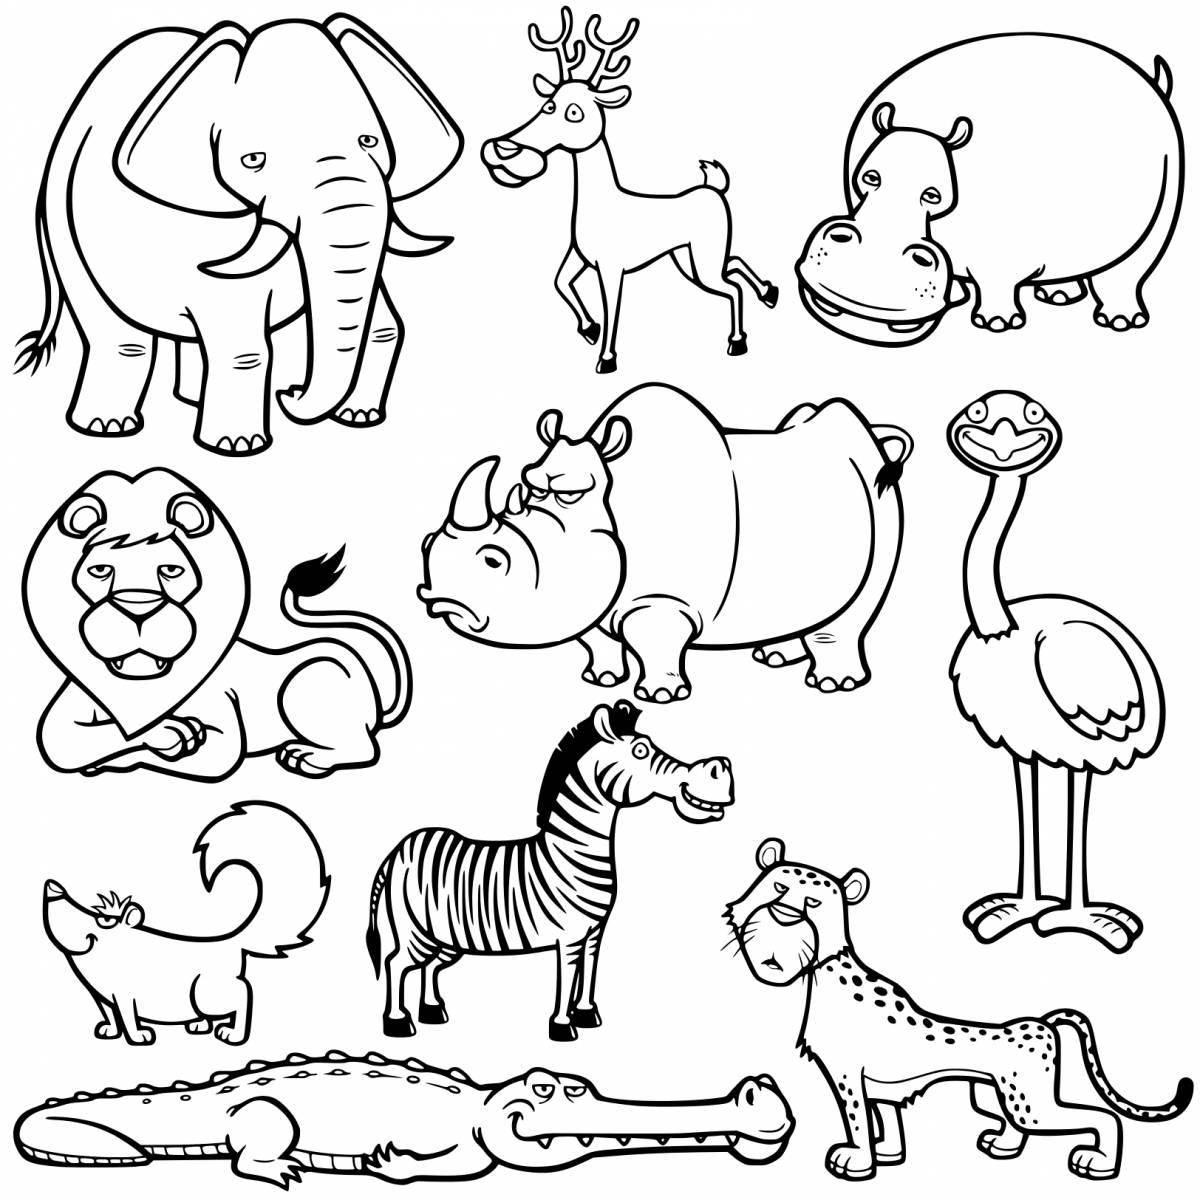 Tempting animal coloring pages from around the world